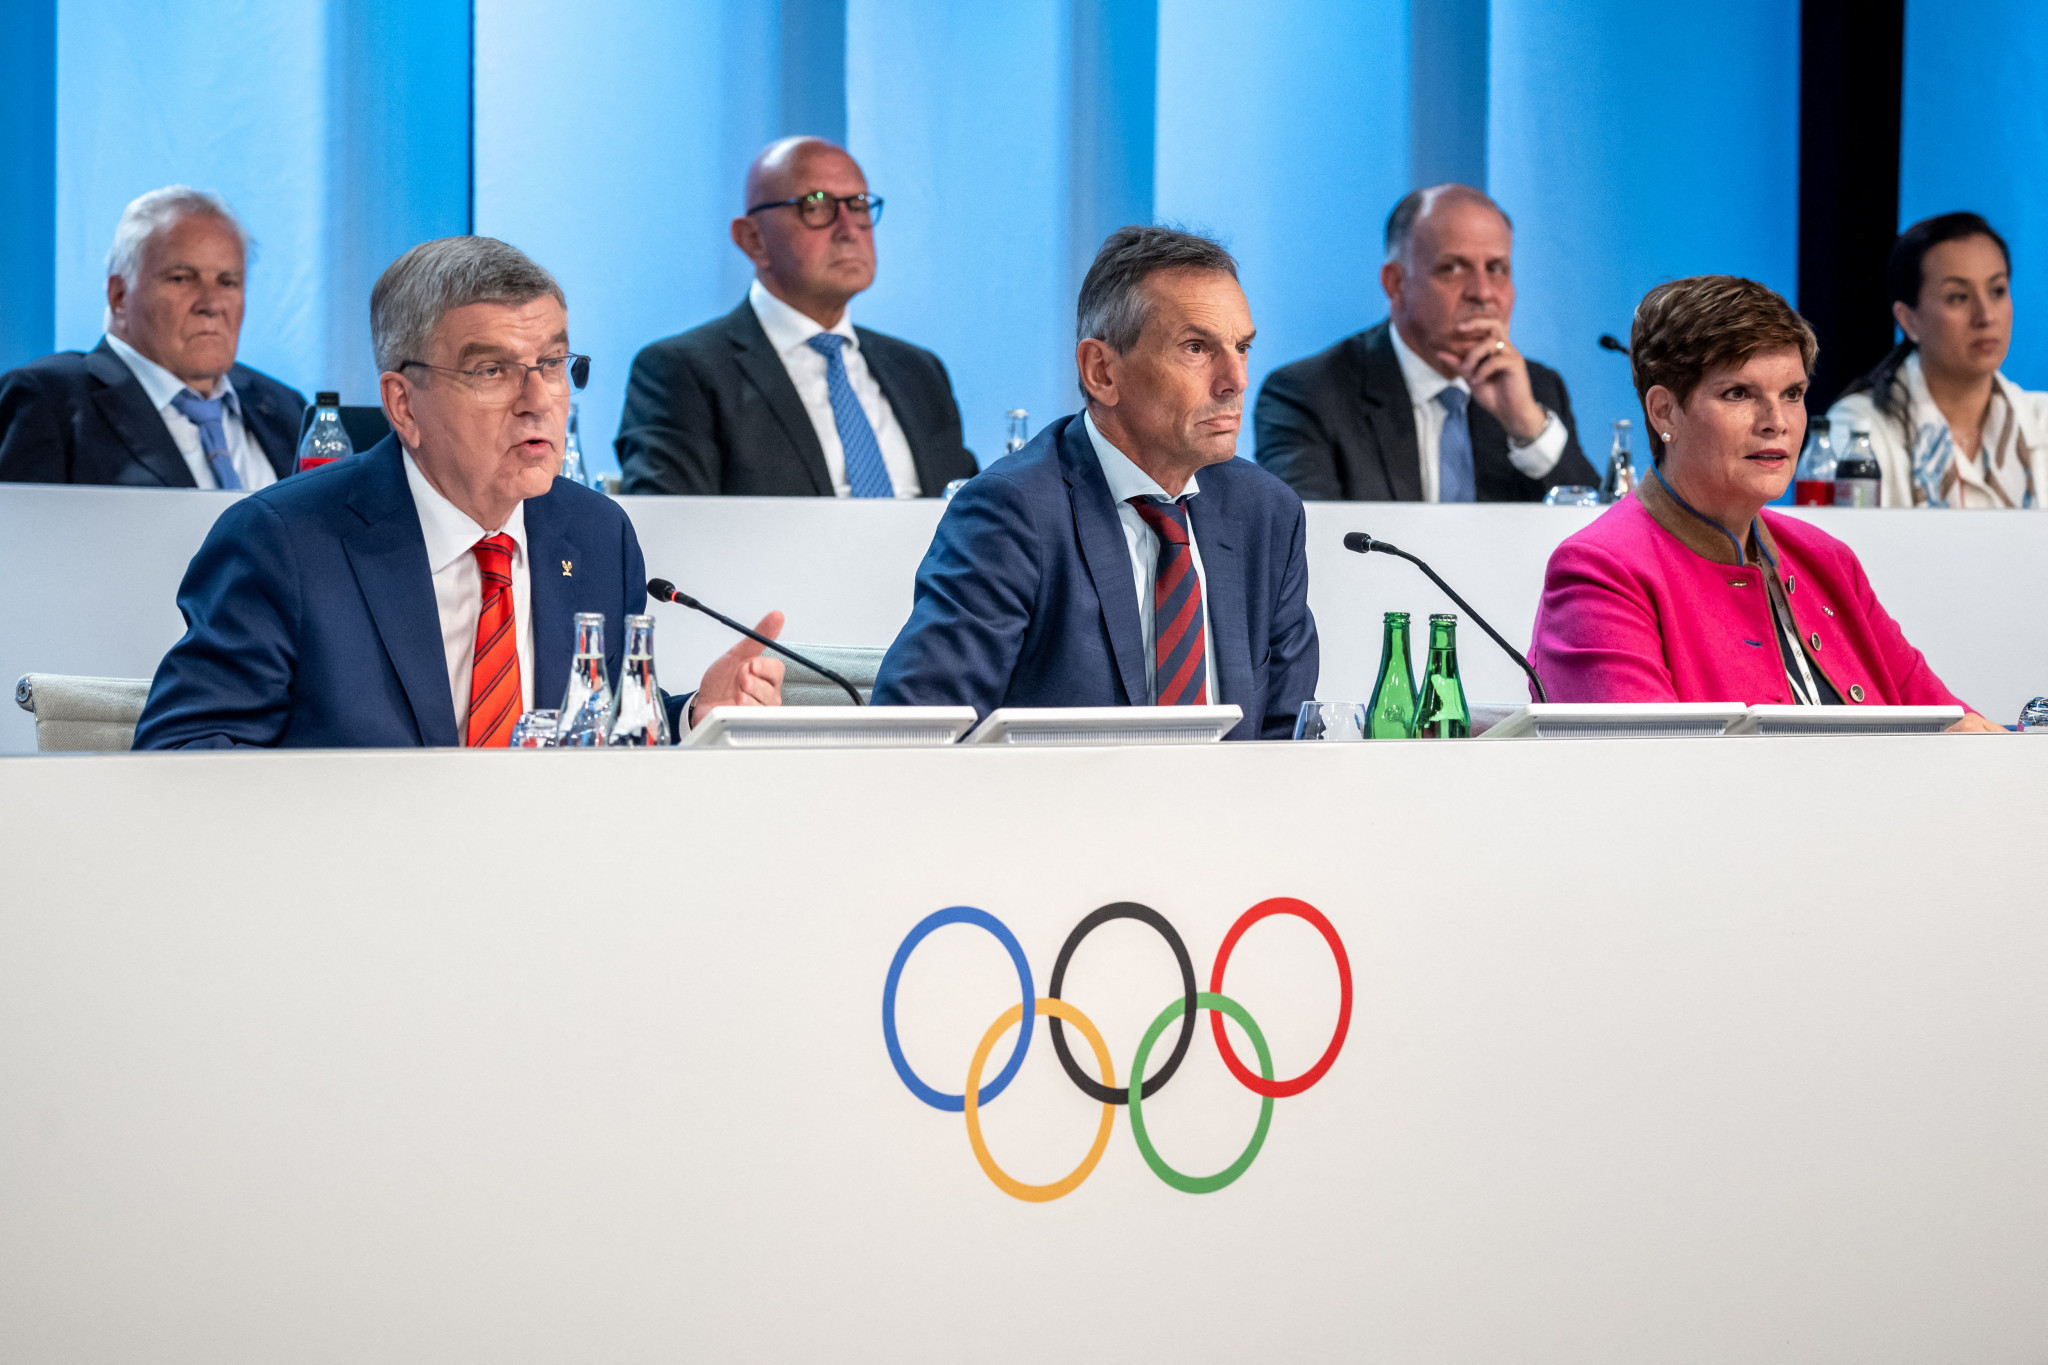 Jordan's Prince Feisal Al Hussein, second right at back, is set for re-election to the IOC Executive Board ©Getty Images